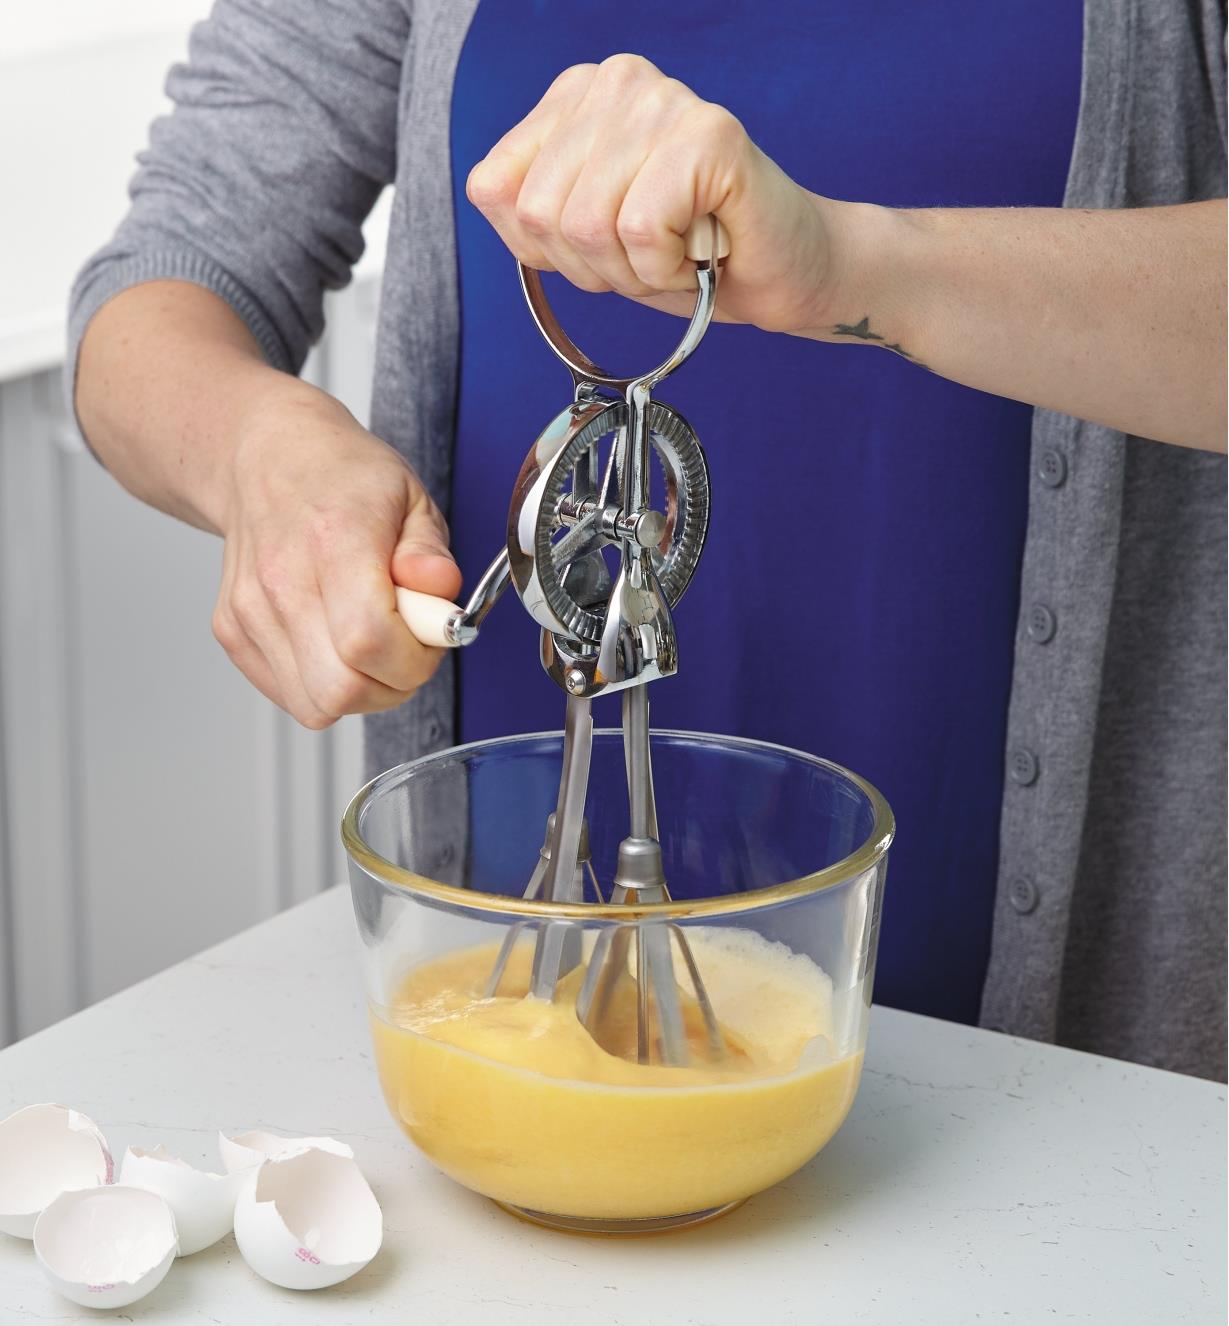 Beating eggs with the Hand-Crank Egg Beater